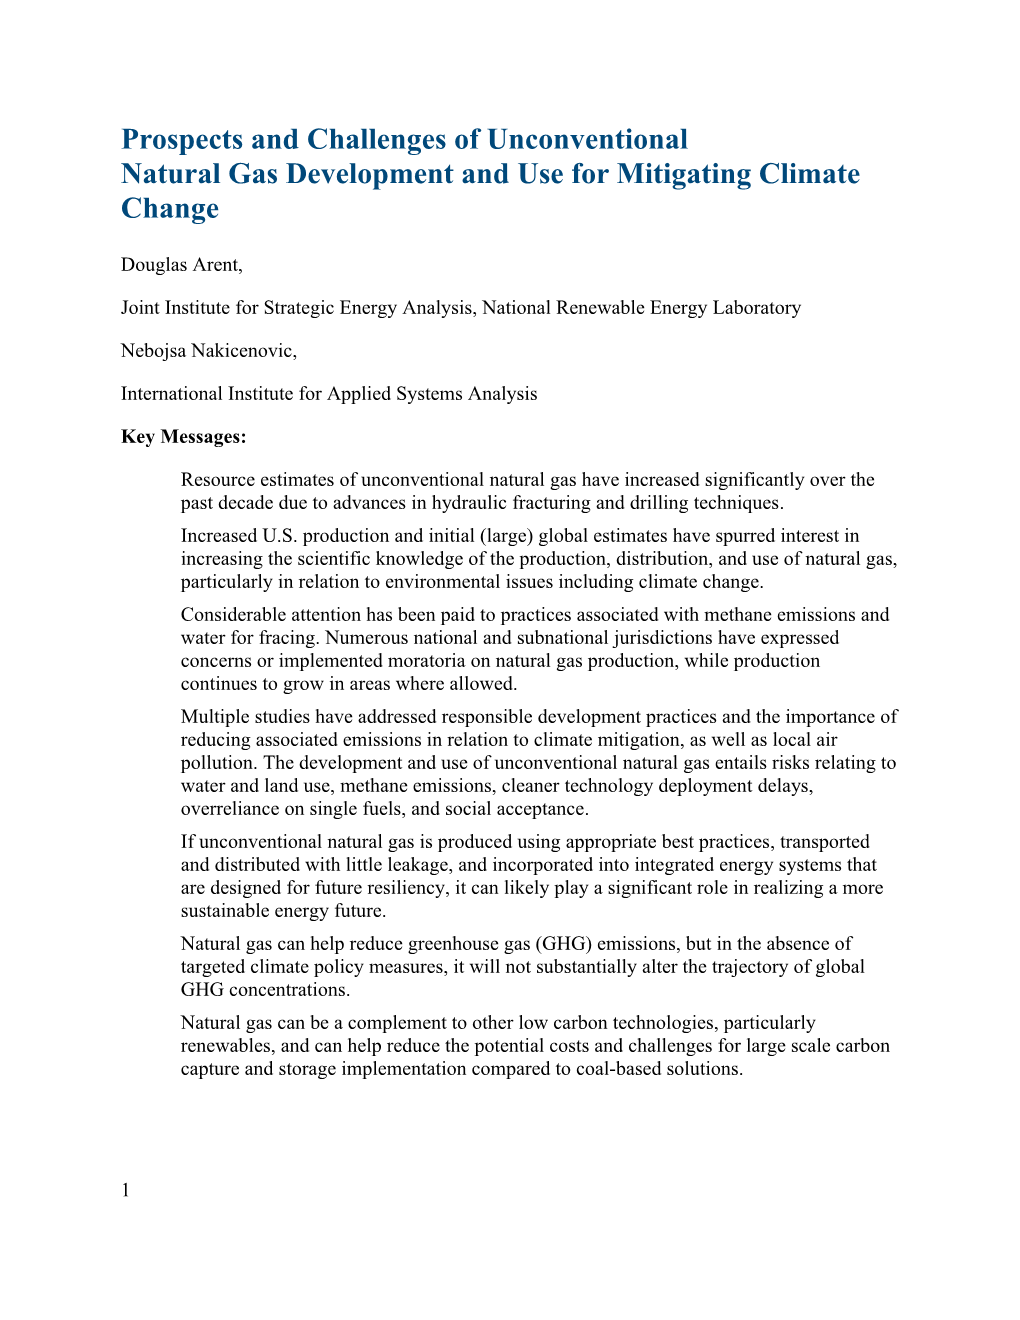 Prospects and Challenges of Unconventional Natural Gas Development and Use for Mitigating